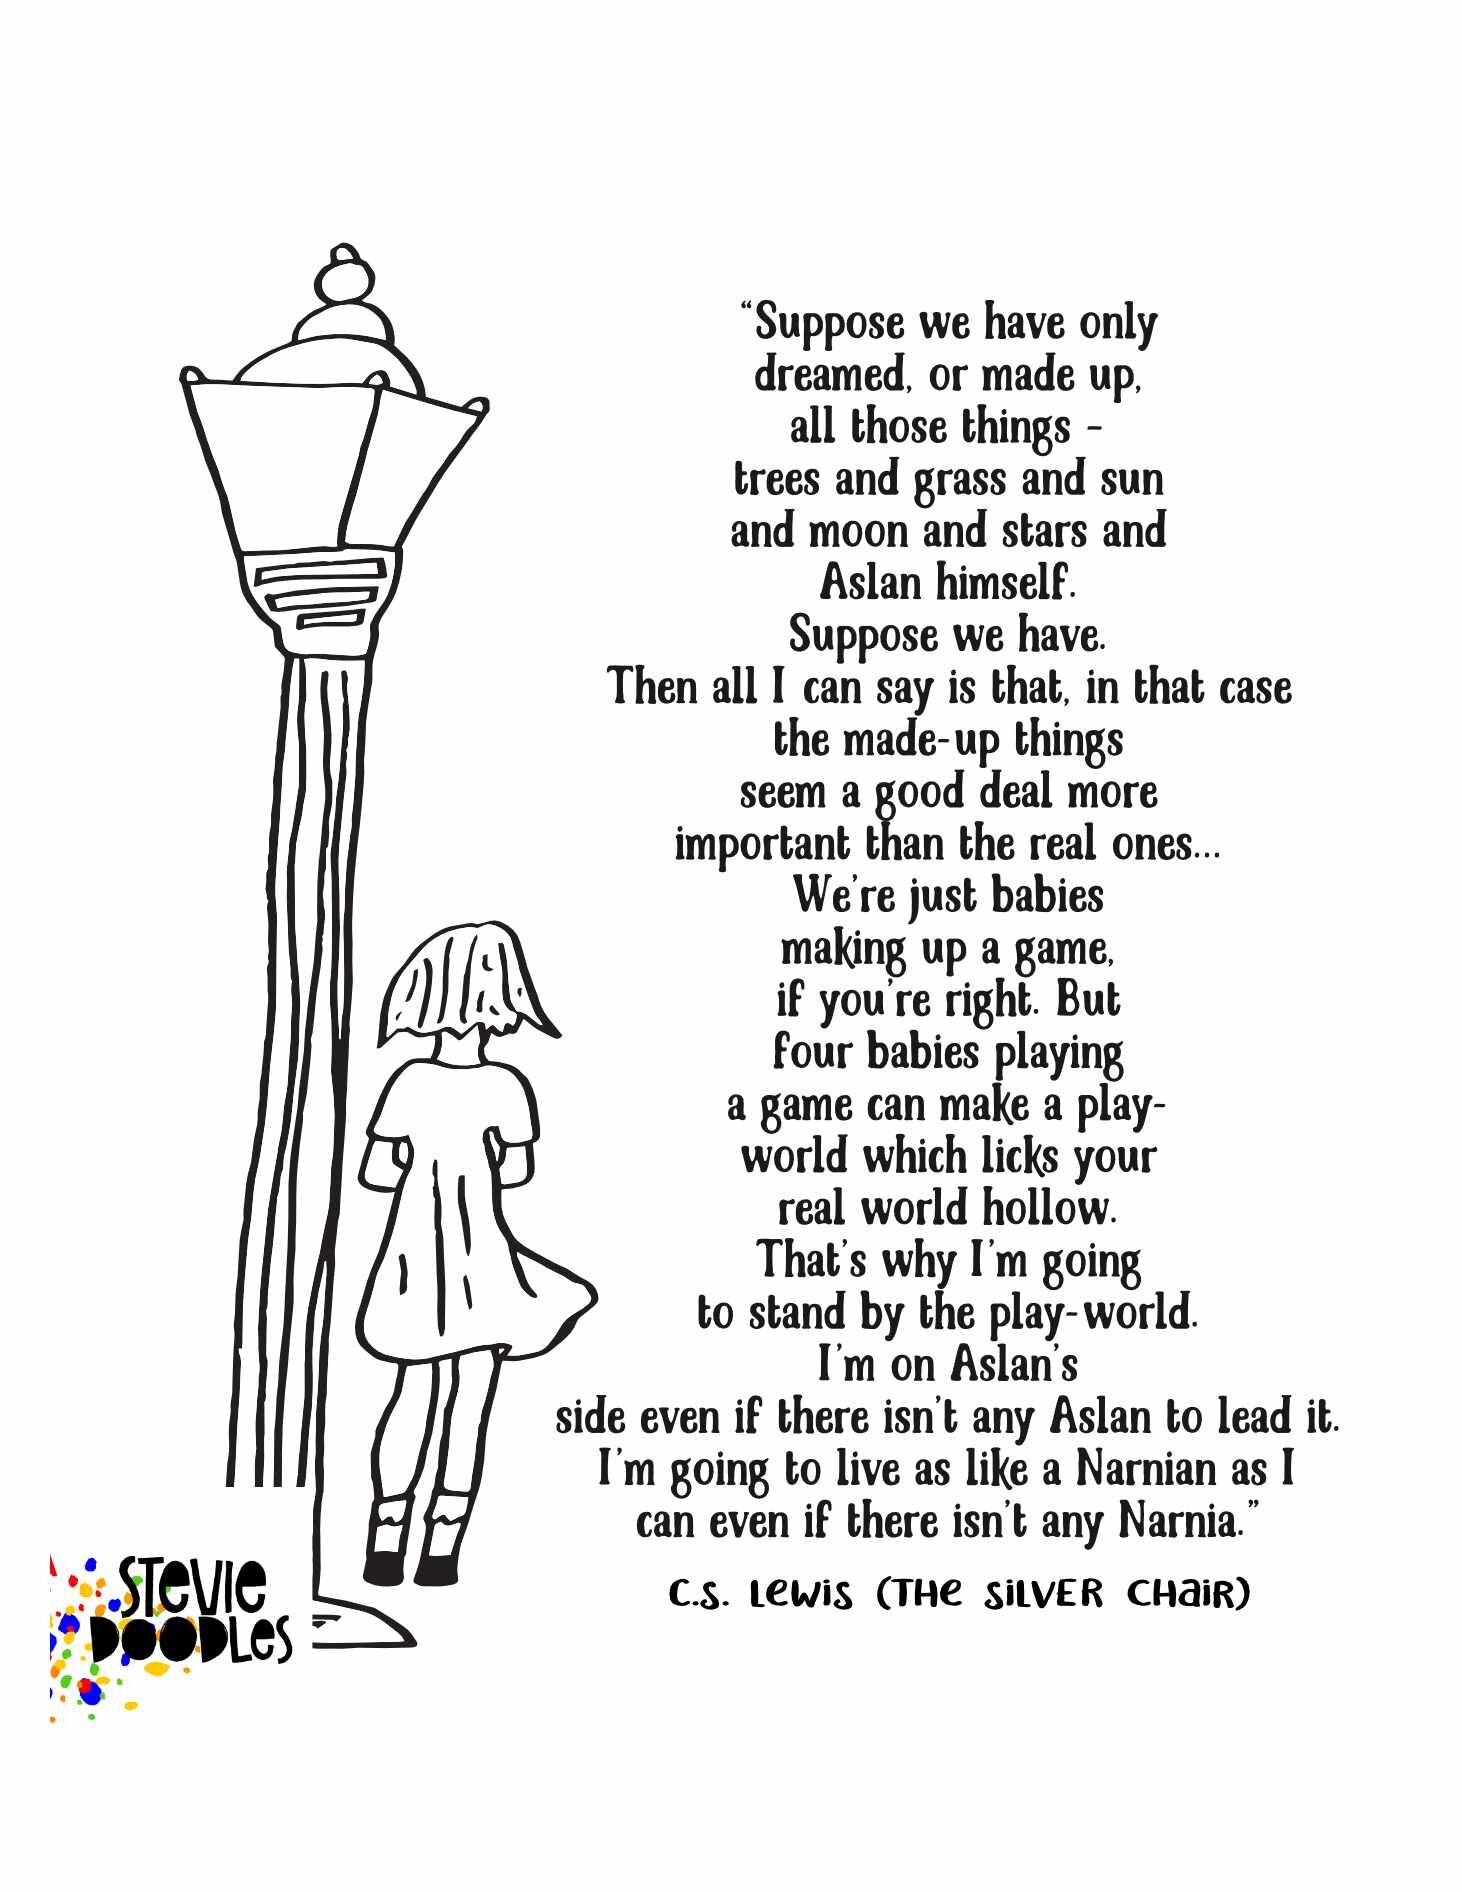 Even If There Isn’t Any Narnia - Lucy With Lamppost Free Printable Narnia Coloring Page from Stevie Doodles